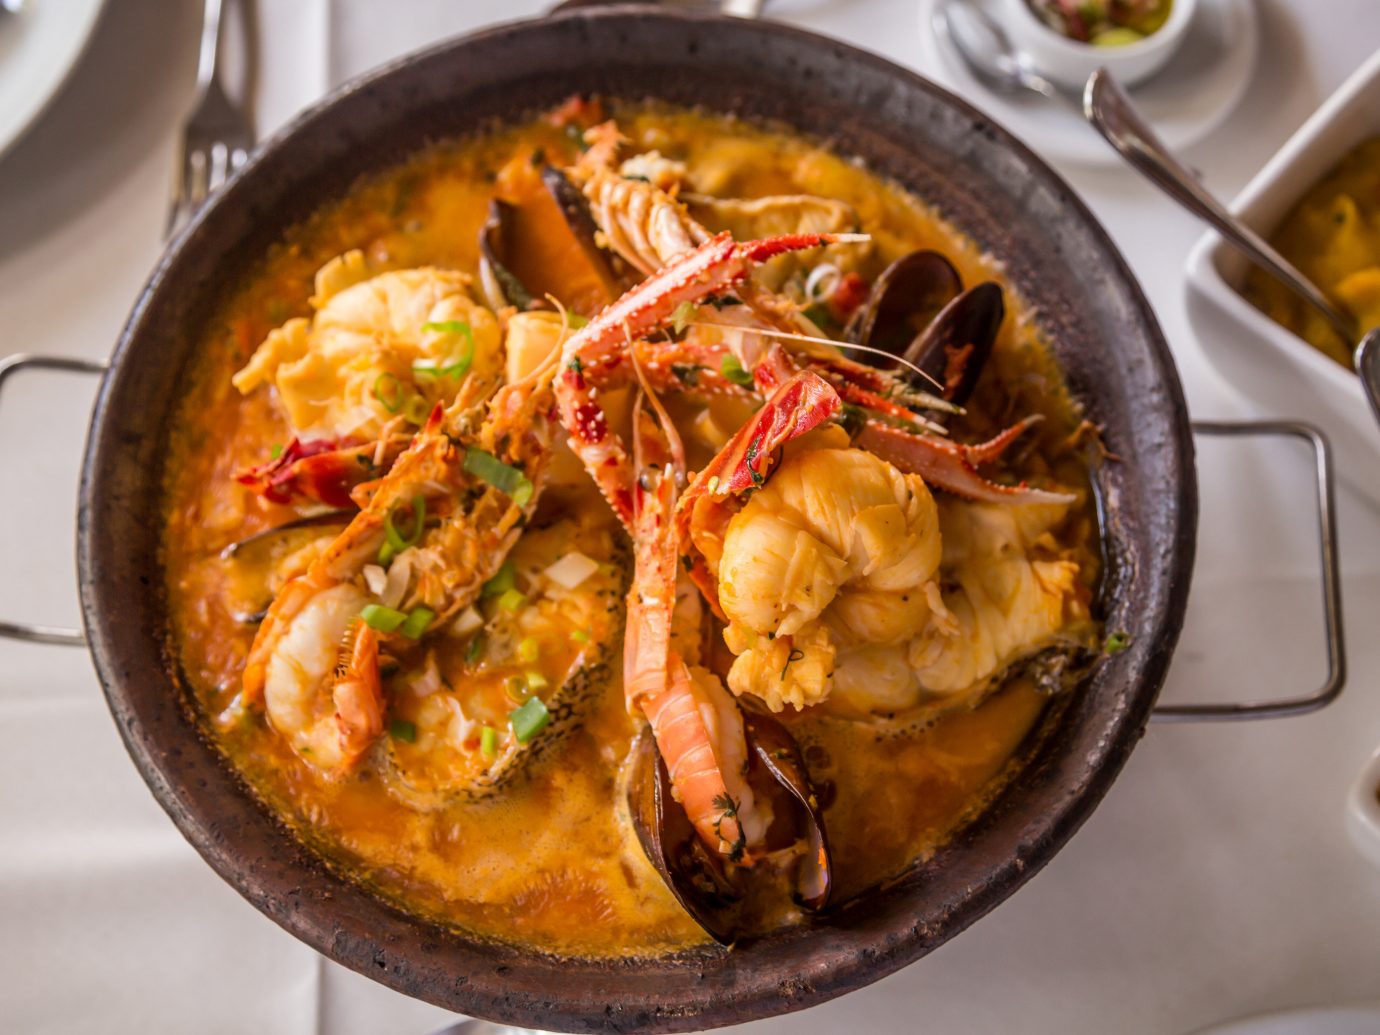 Beaches Brazil Trip Ideas food dish cuisine bowl bouillabaisse curry Seafood produce thai food asian food pan meat stew meal cooked several soup